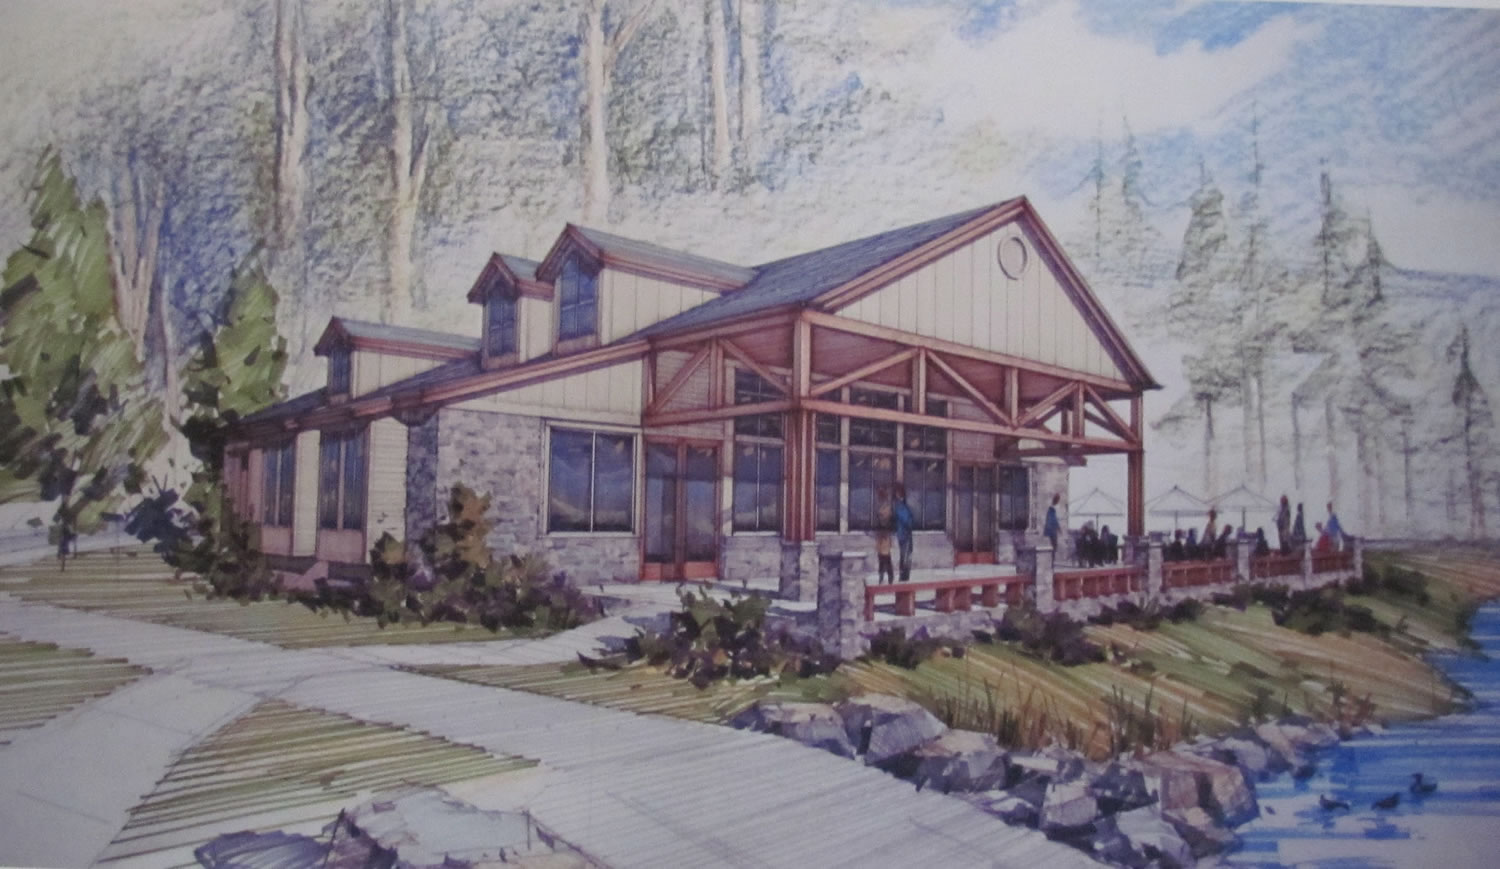 Pictured is an architect's rendering of the future Lacamas Lake Lodge, which will be built on the site of what was formerly the Camas Moose Lodge.